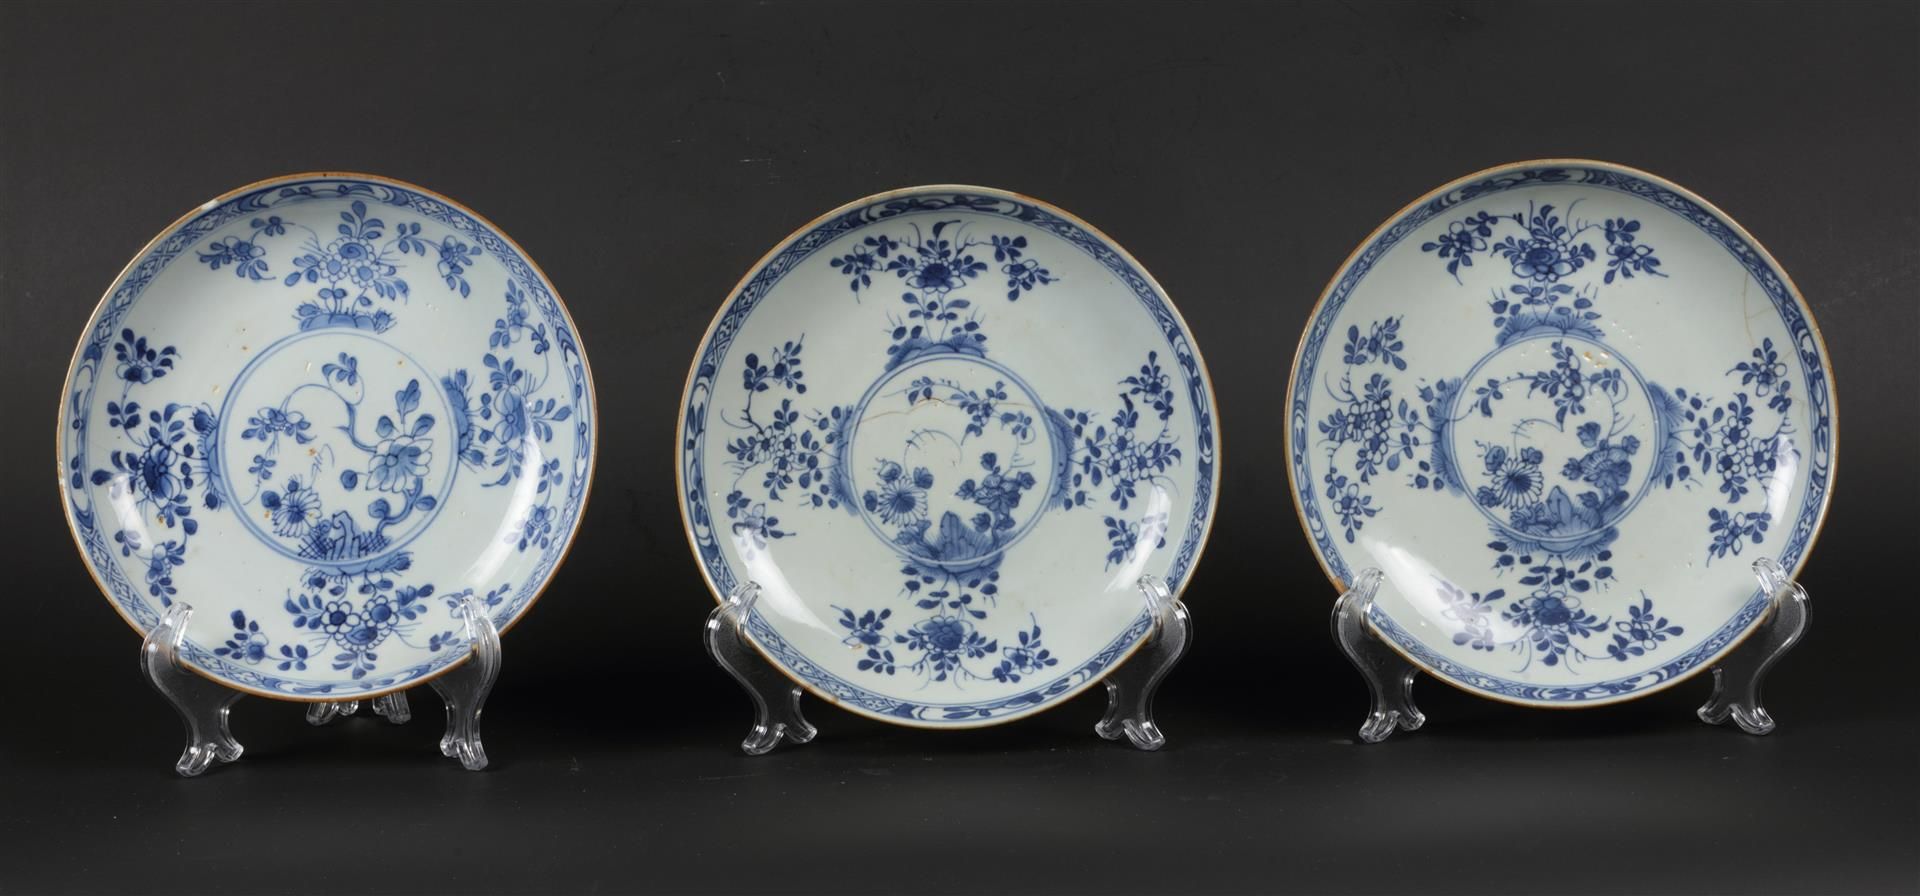 A set of porcelain plates with floral decor. China Qianglon